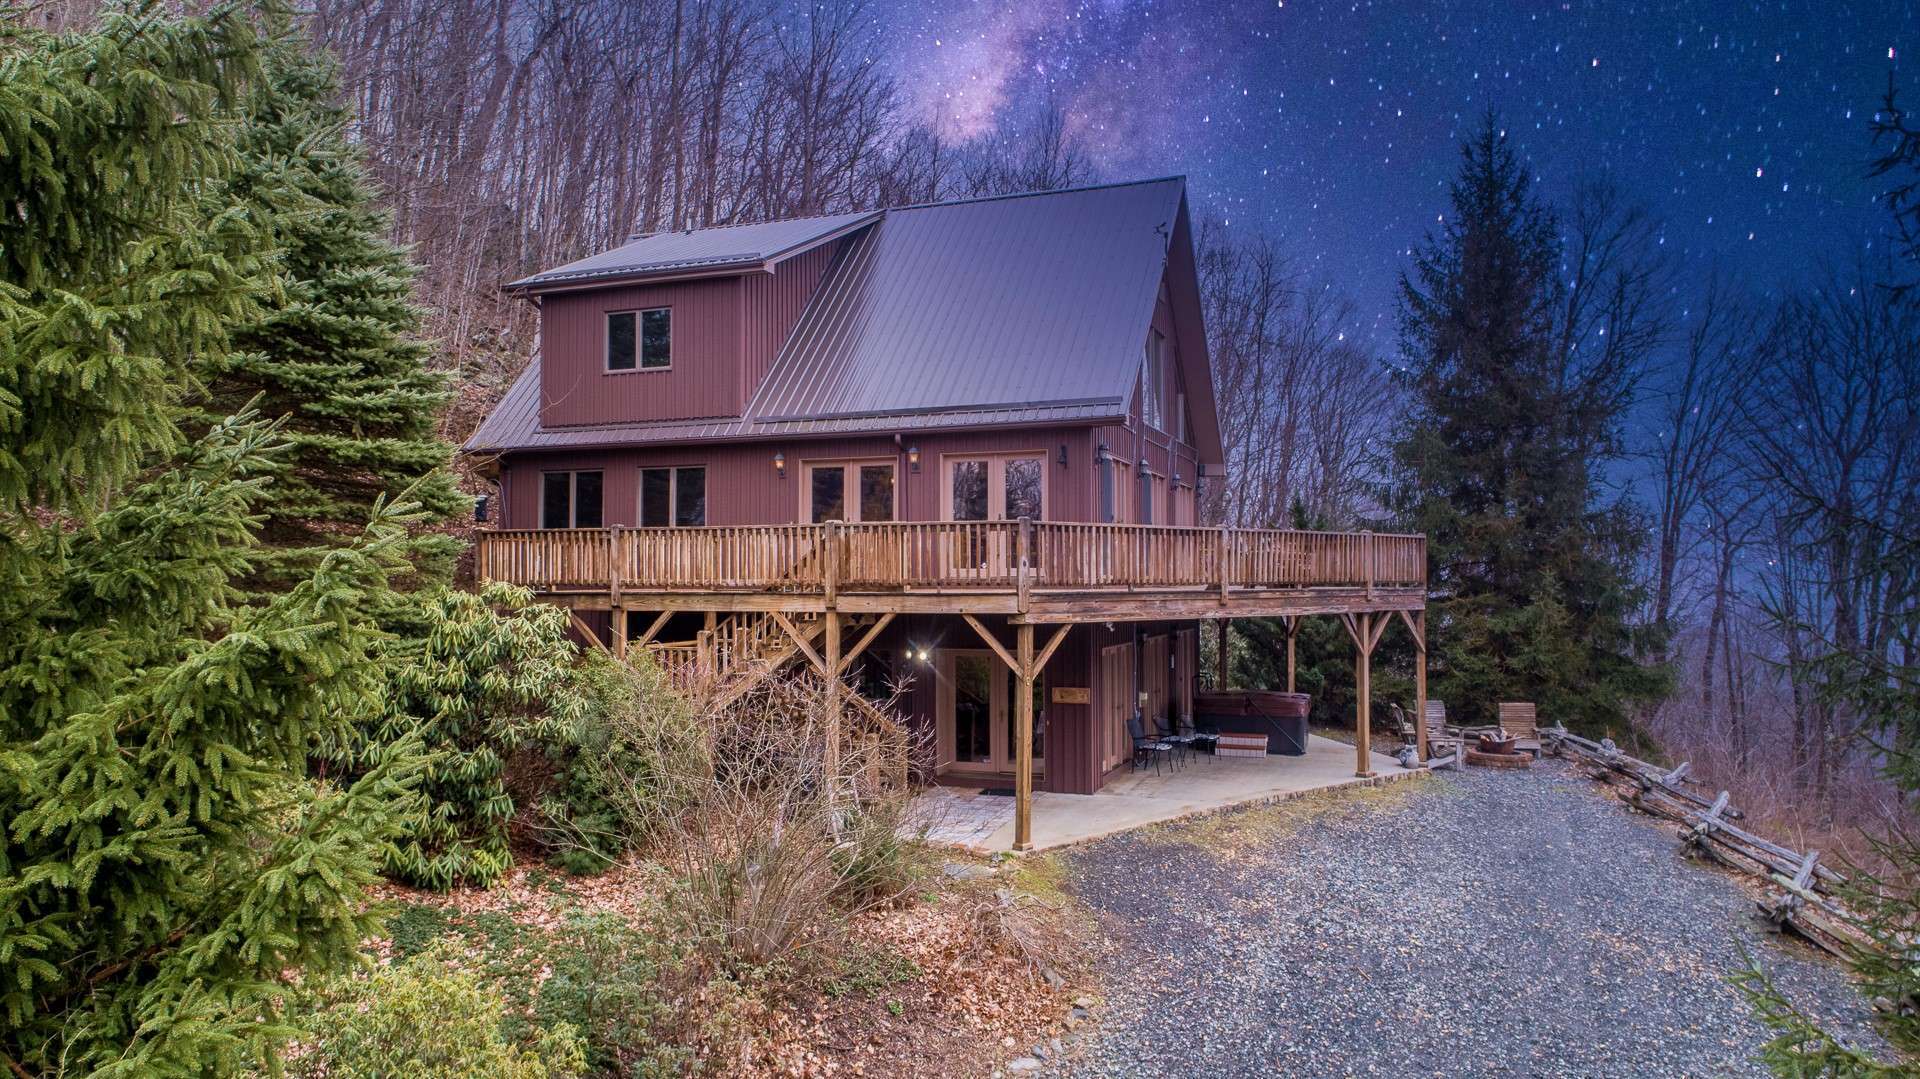 Or, enjoy the fresh mountain air and sounds of Nature under evening's star lit skies.